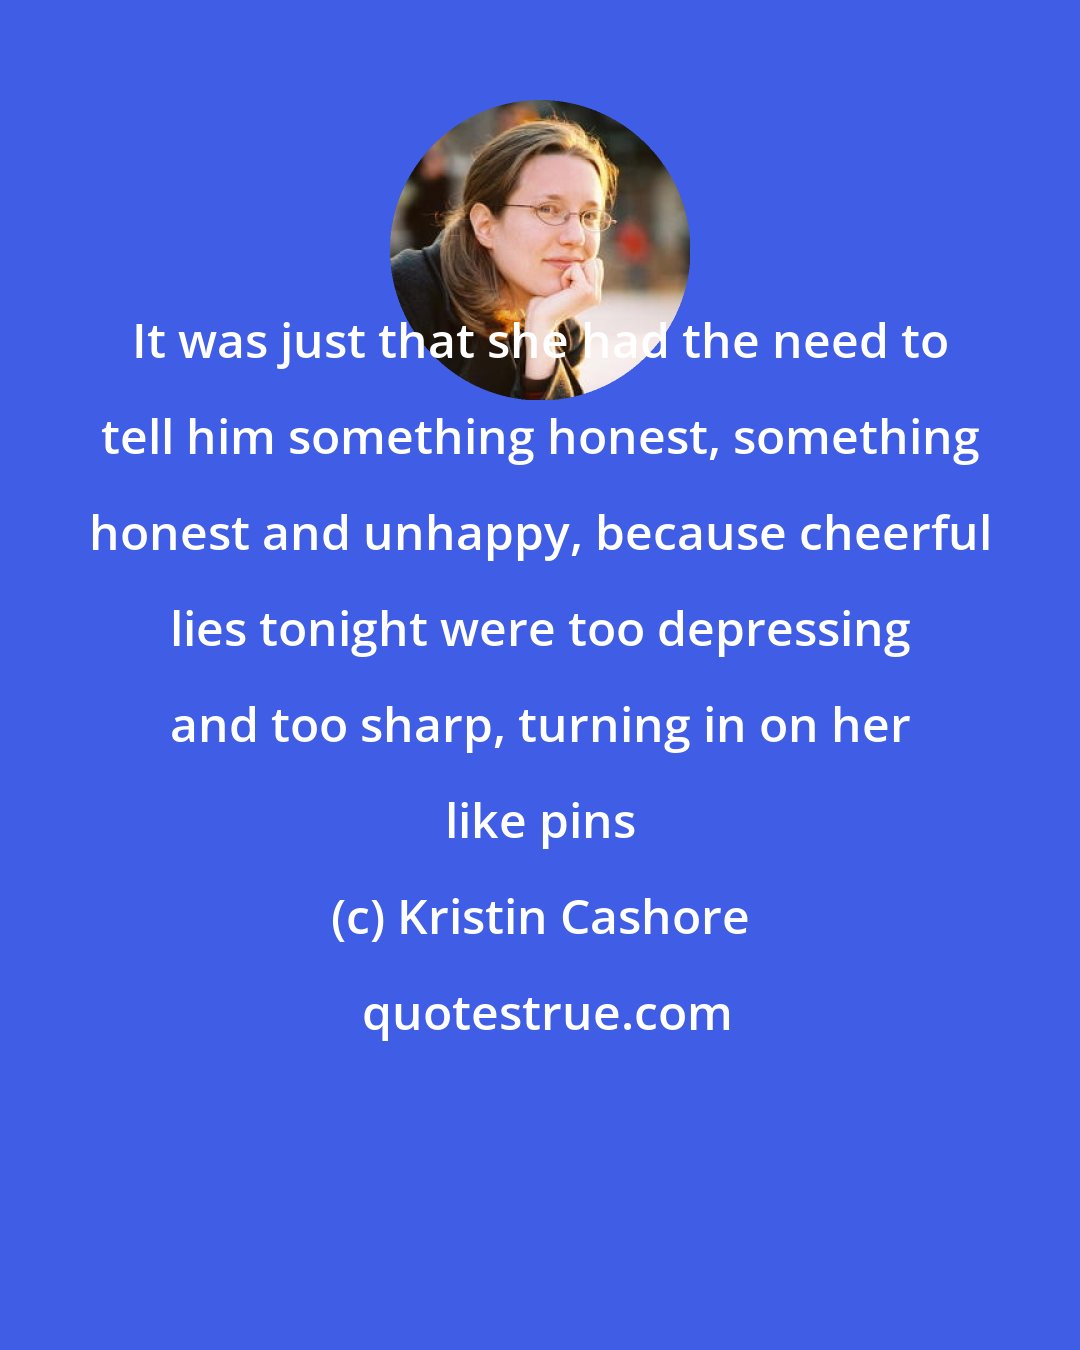 Kristin Cashore: It was just that she had the need to tell him something honest, something honest and unhappy, because cheerful lies tonight were too depressing and too sharp, turning in on her like pins